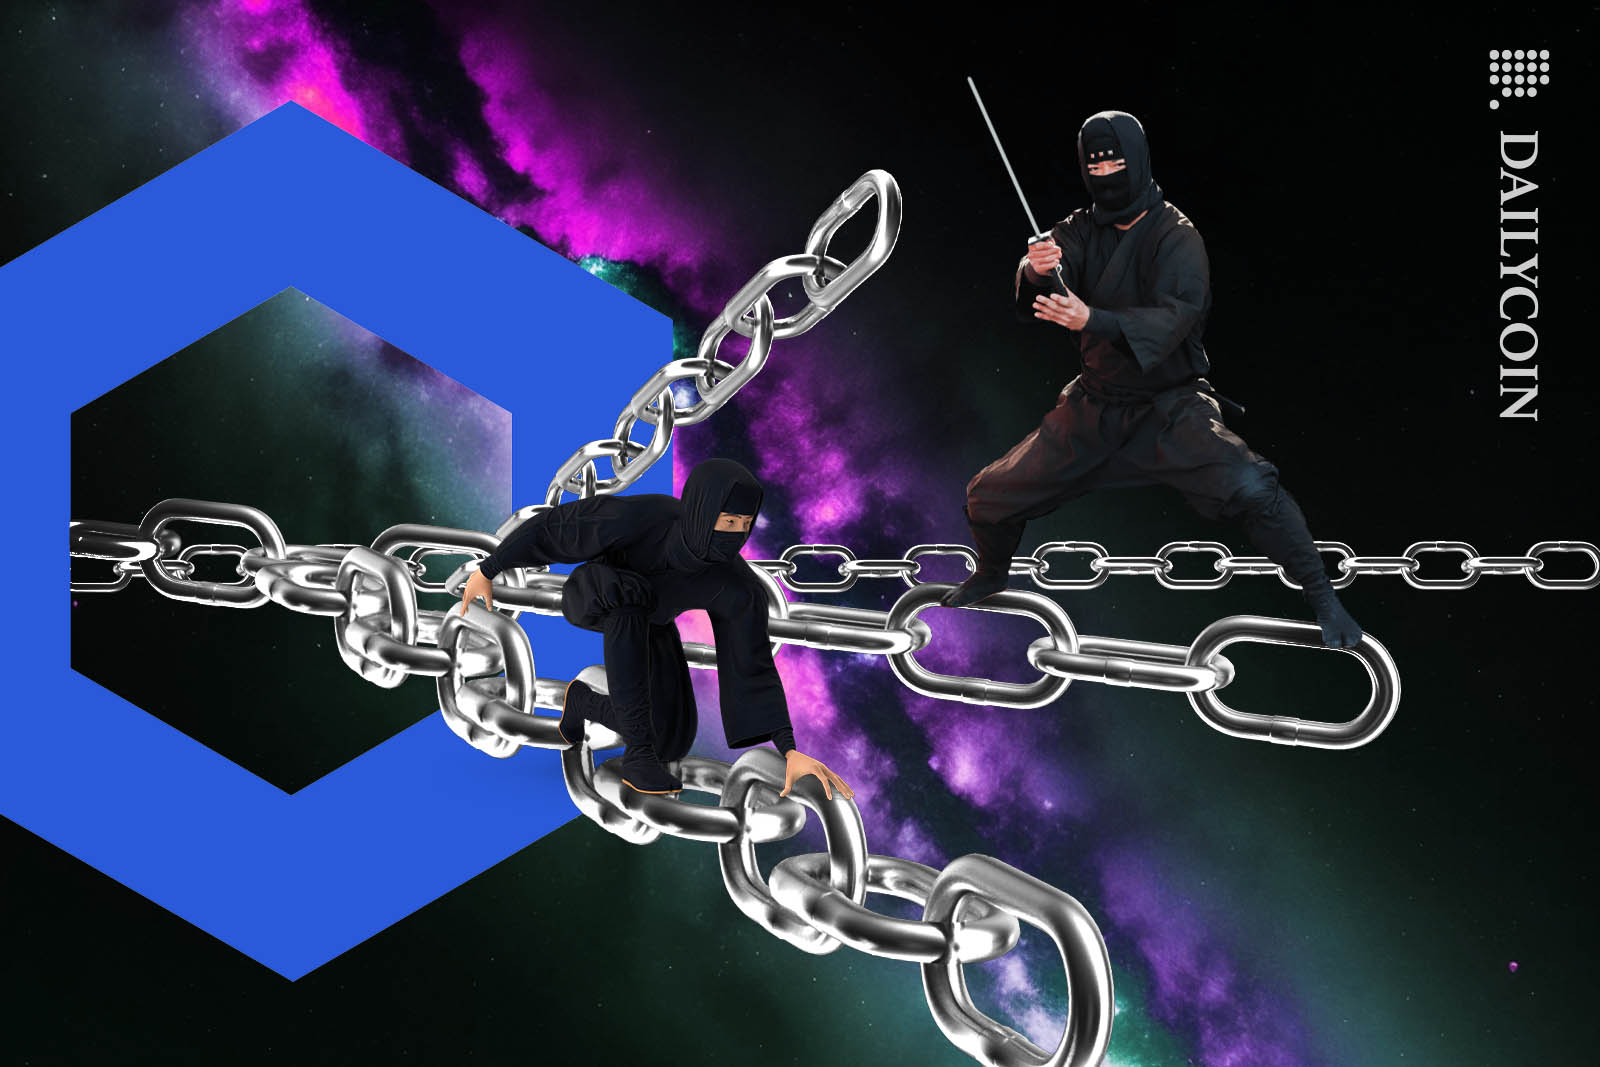 Two ninjas preparing for battle on giant chains stretched accross space.